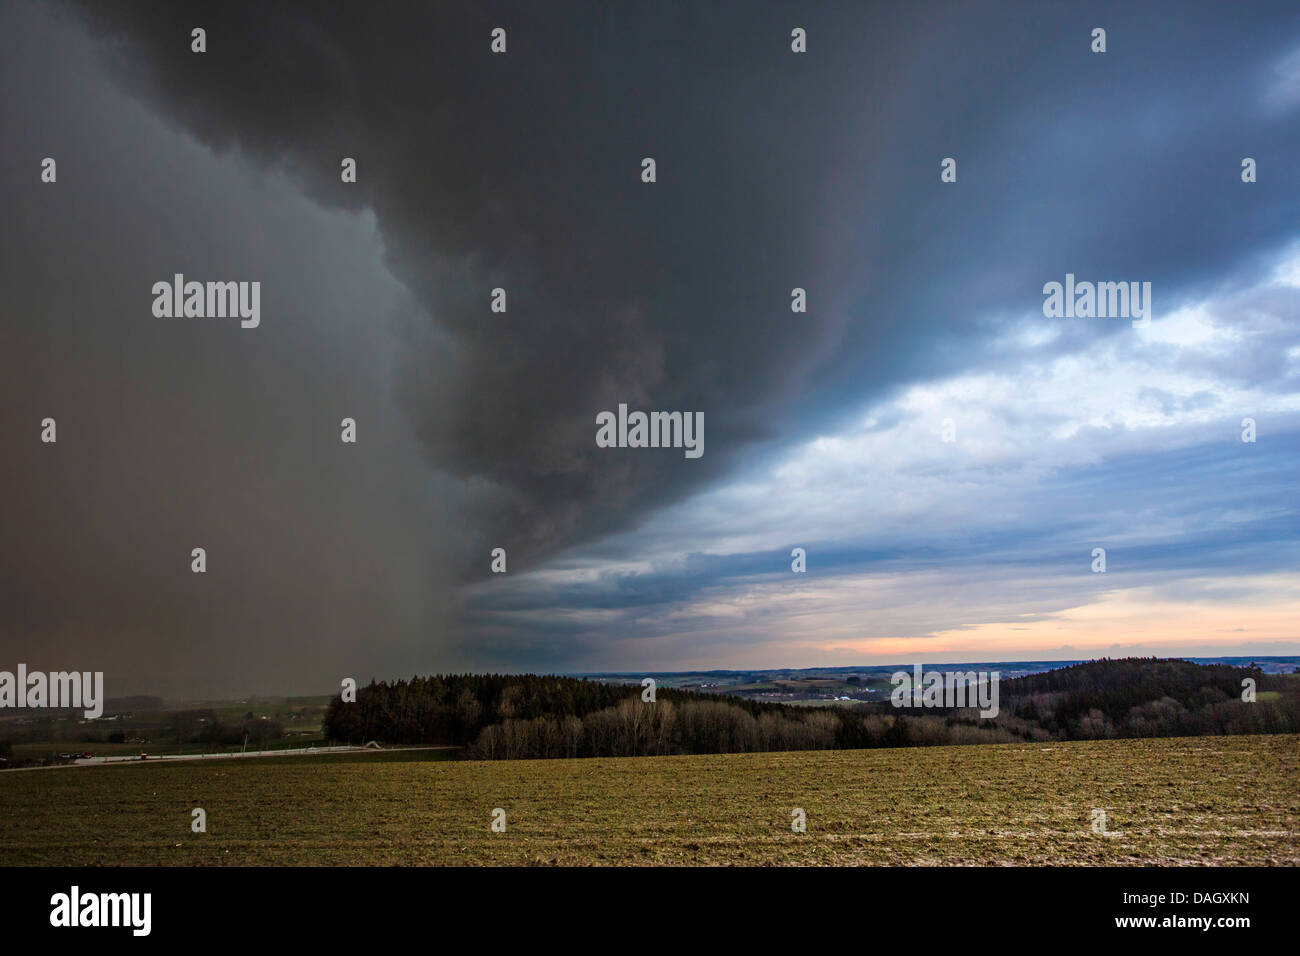 dramatical storm front with heavy rain tracking over river valley, Germany, Bavaria, Isental Stock Photo